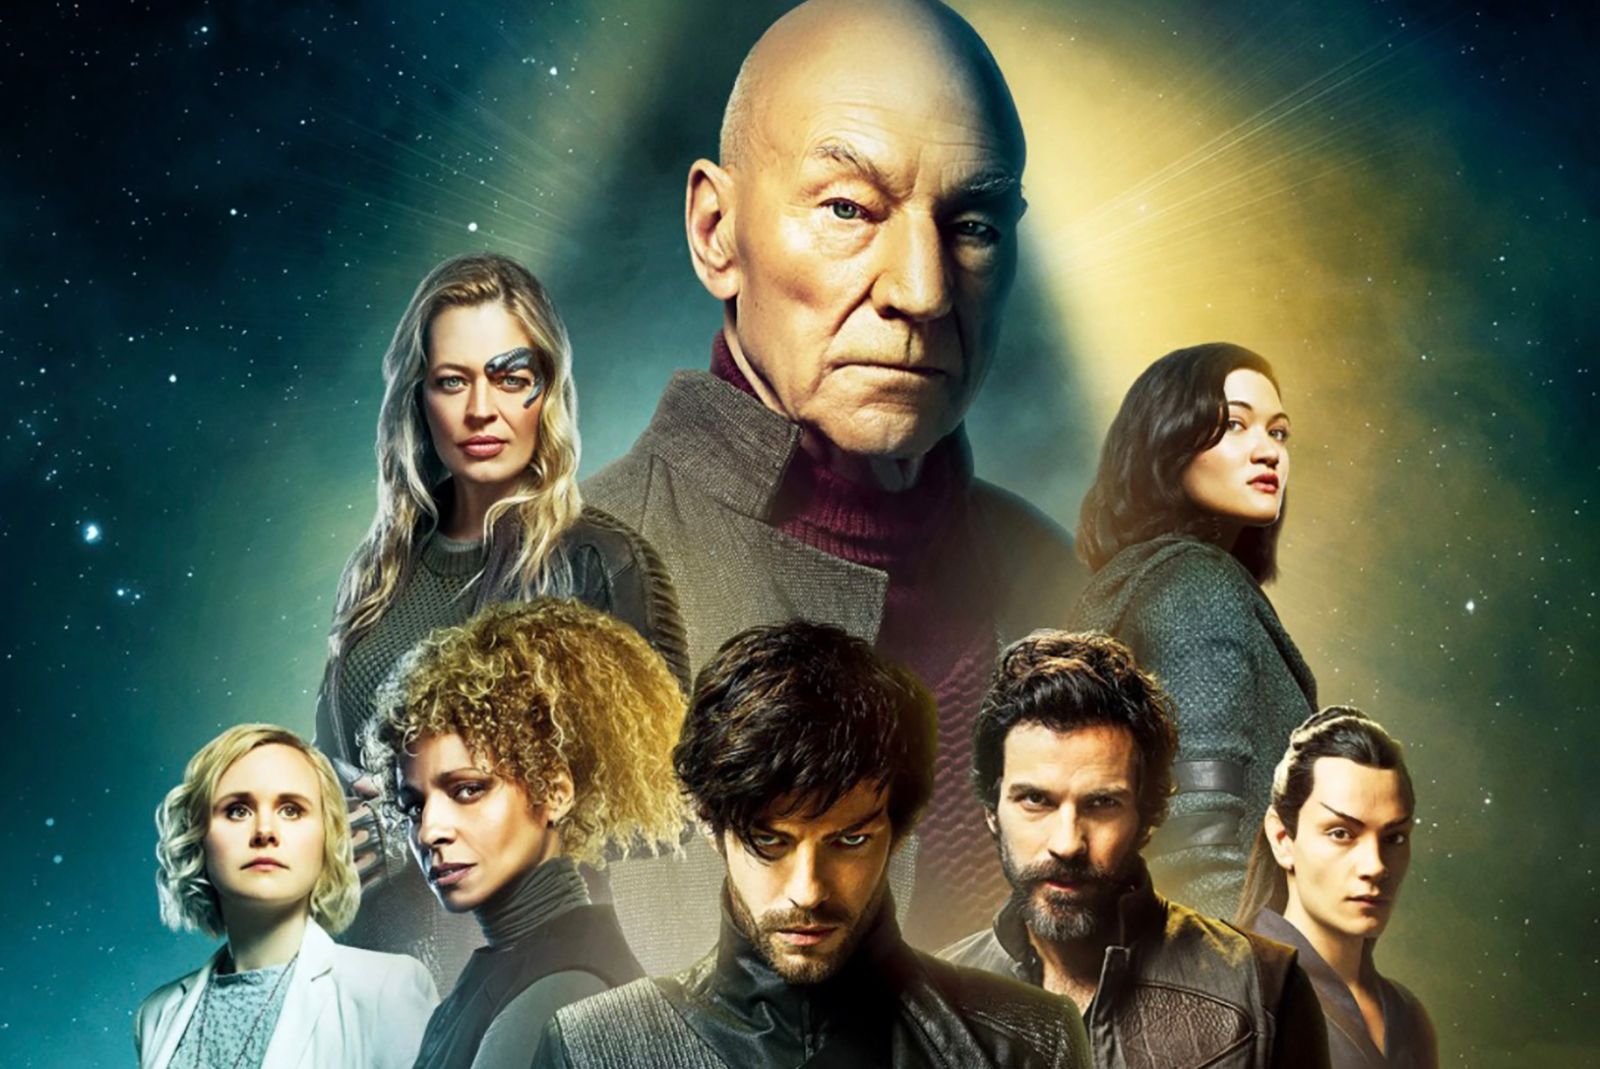 Star Trek Picard season 3: Release date, trailers, and how to watch photo 3